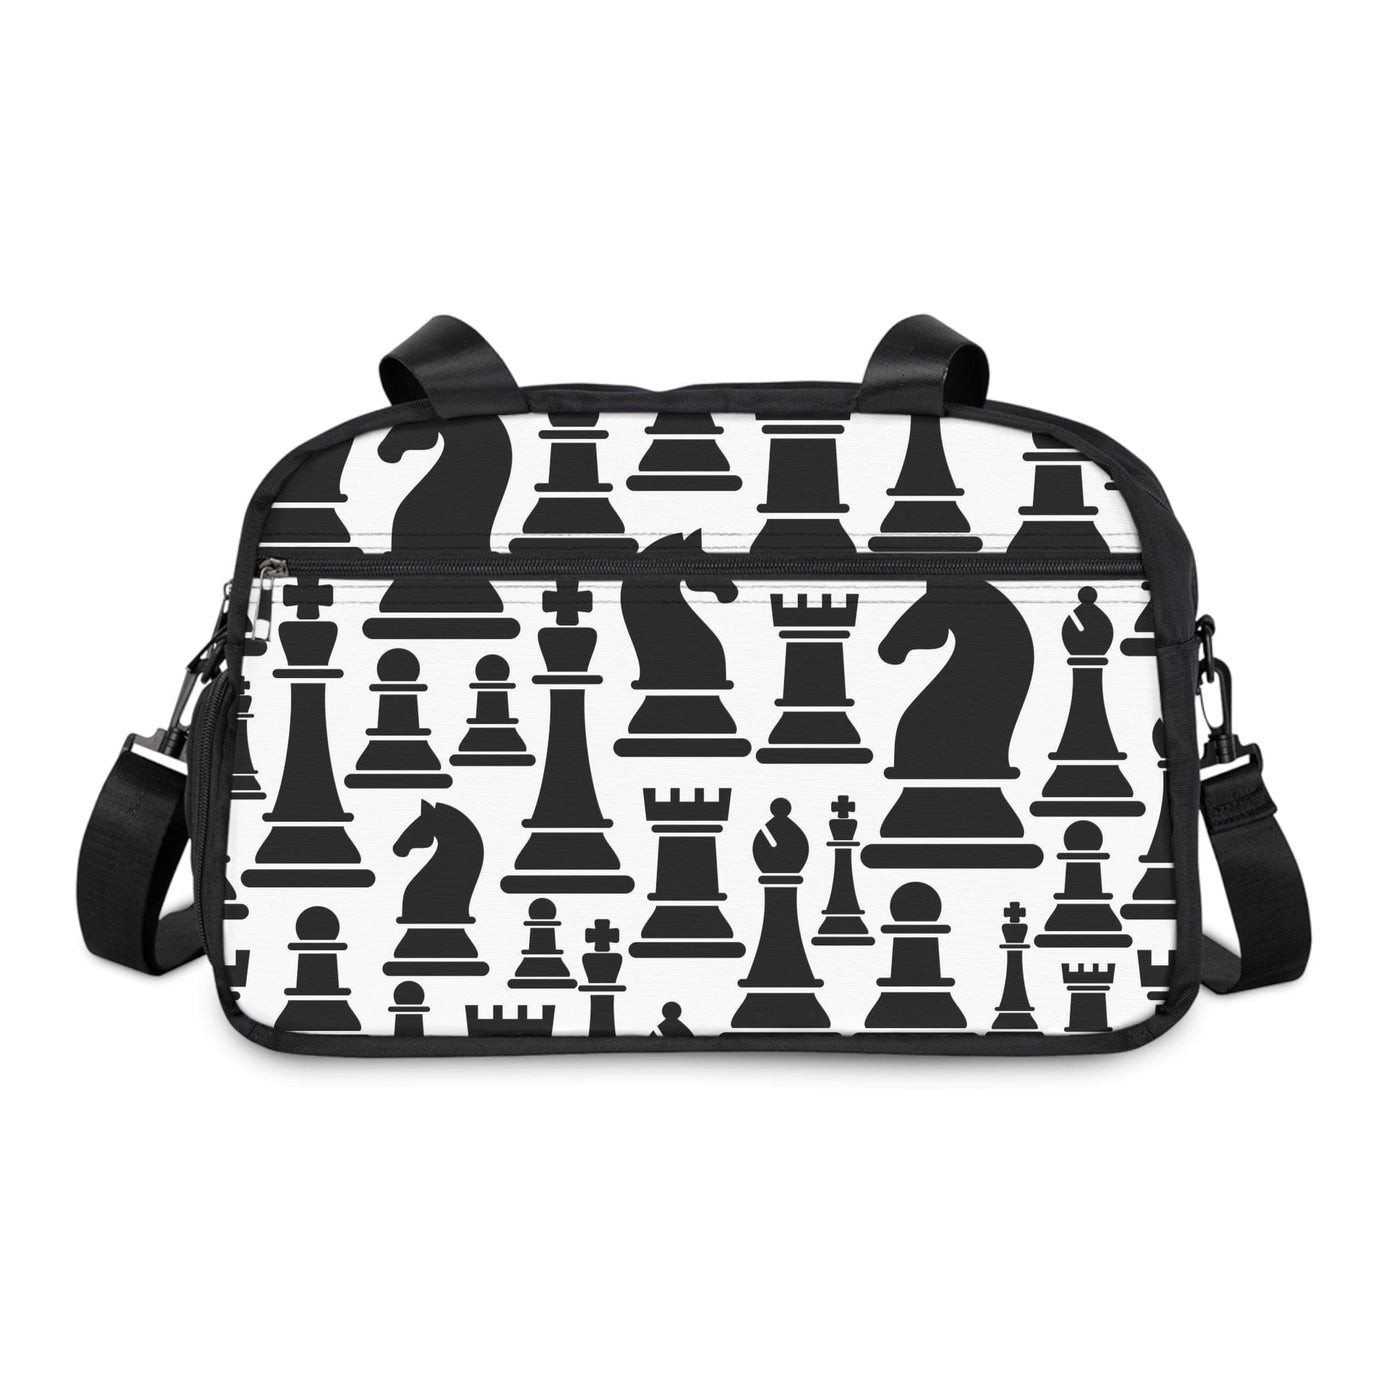 Travel Fitness Bag Black And White Chess Print - Bags